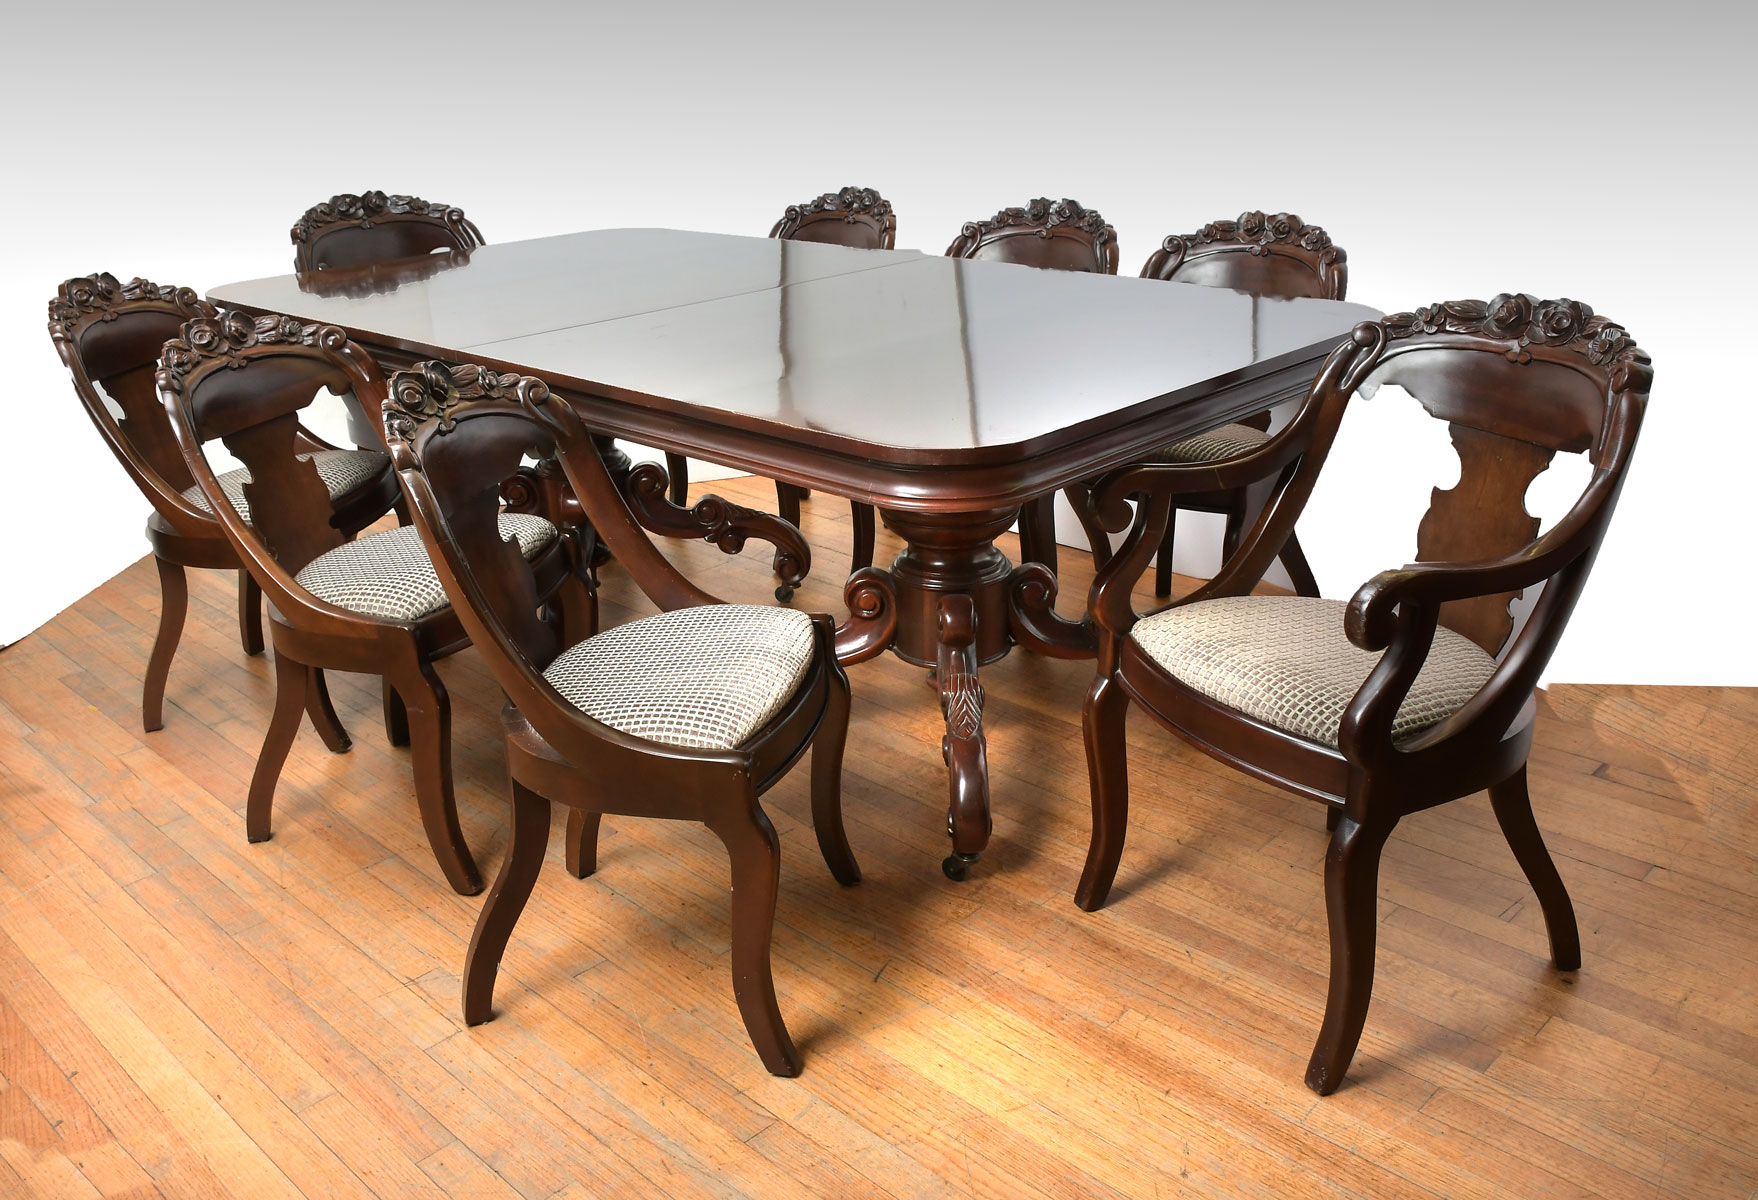 DINING TABLE WITH 6 CHAIRS & 2 LEAVES: